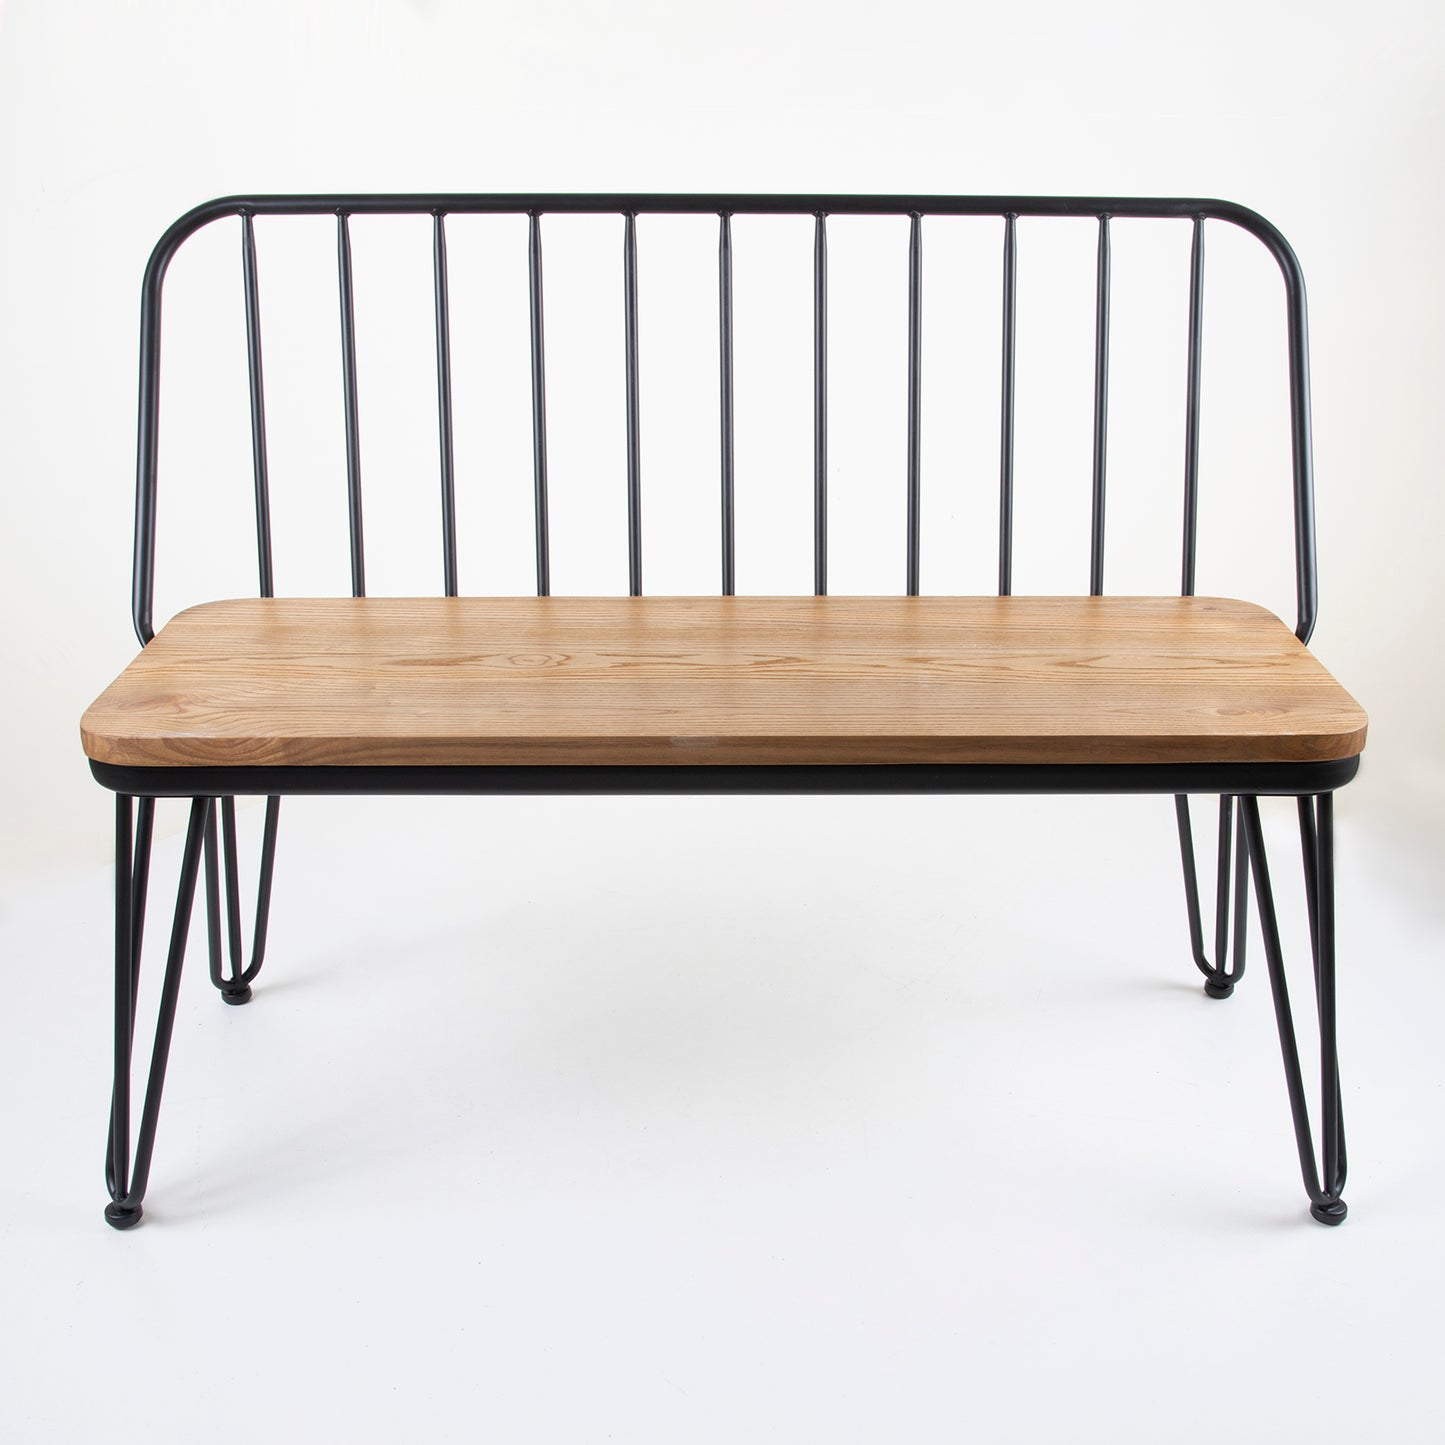 Rustic Bench With Wire Backrest